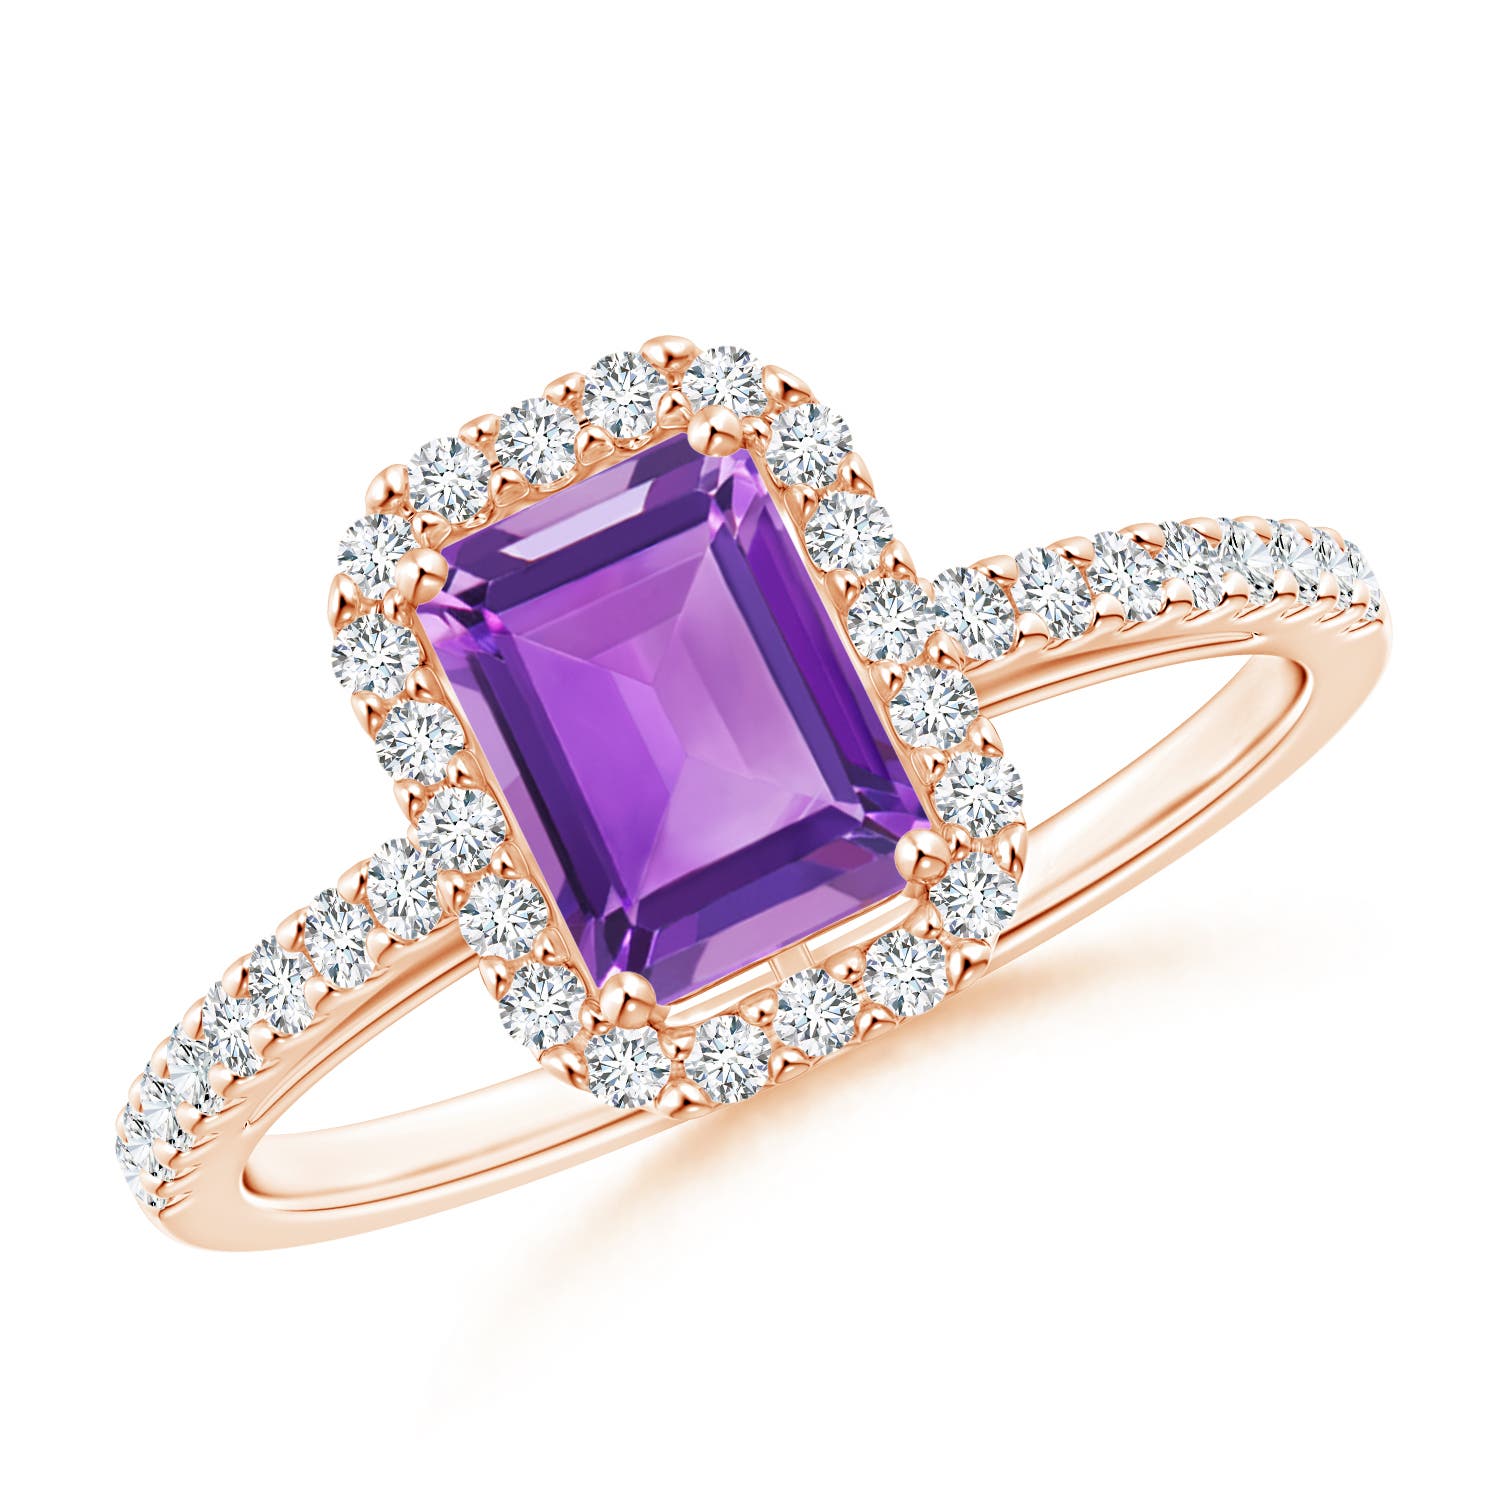 AA - Amethyst / 1.23 CT / 14 KT Rose Gold